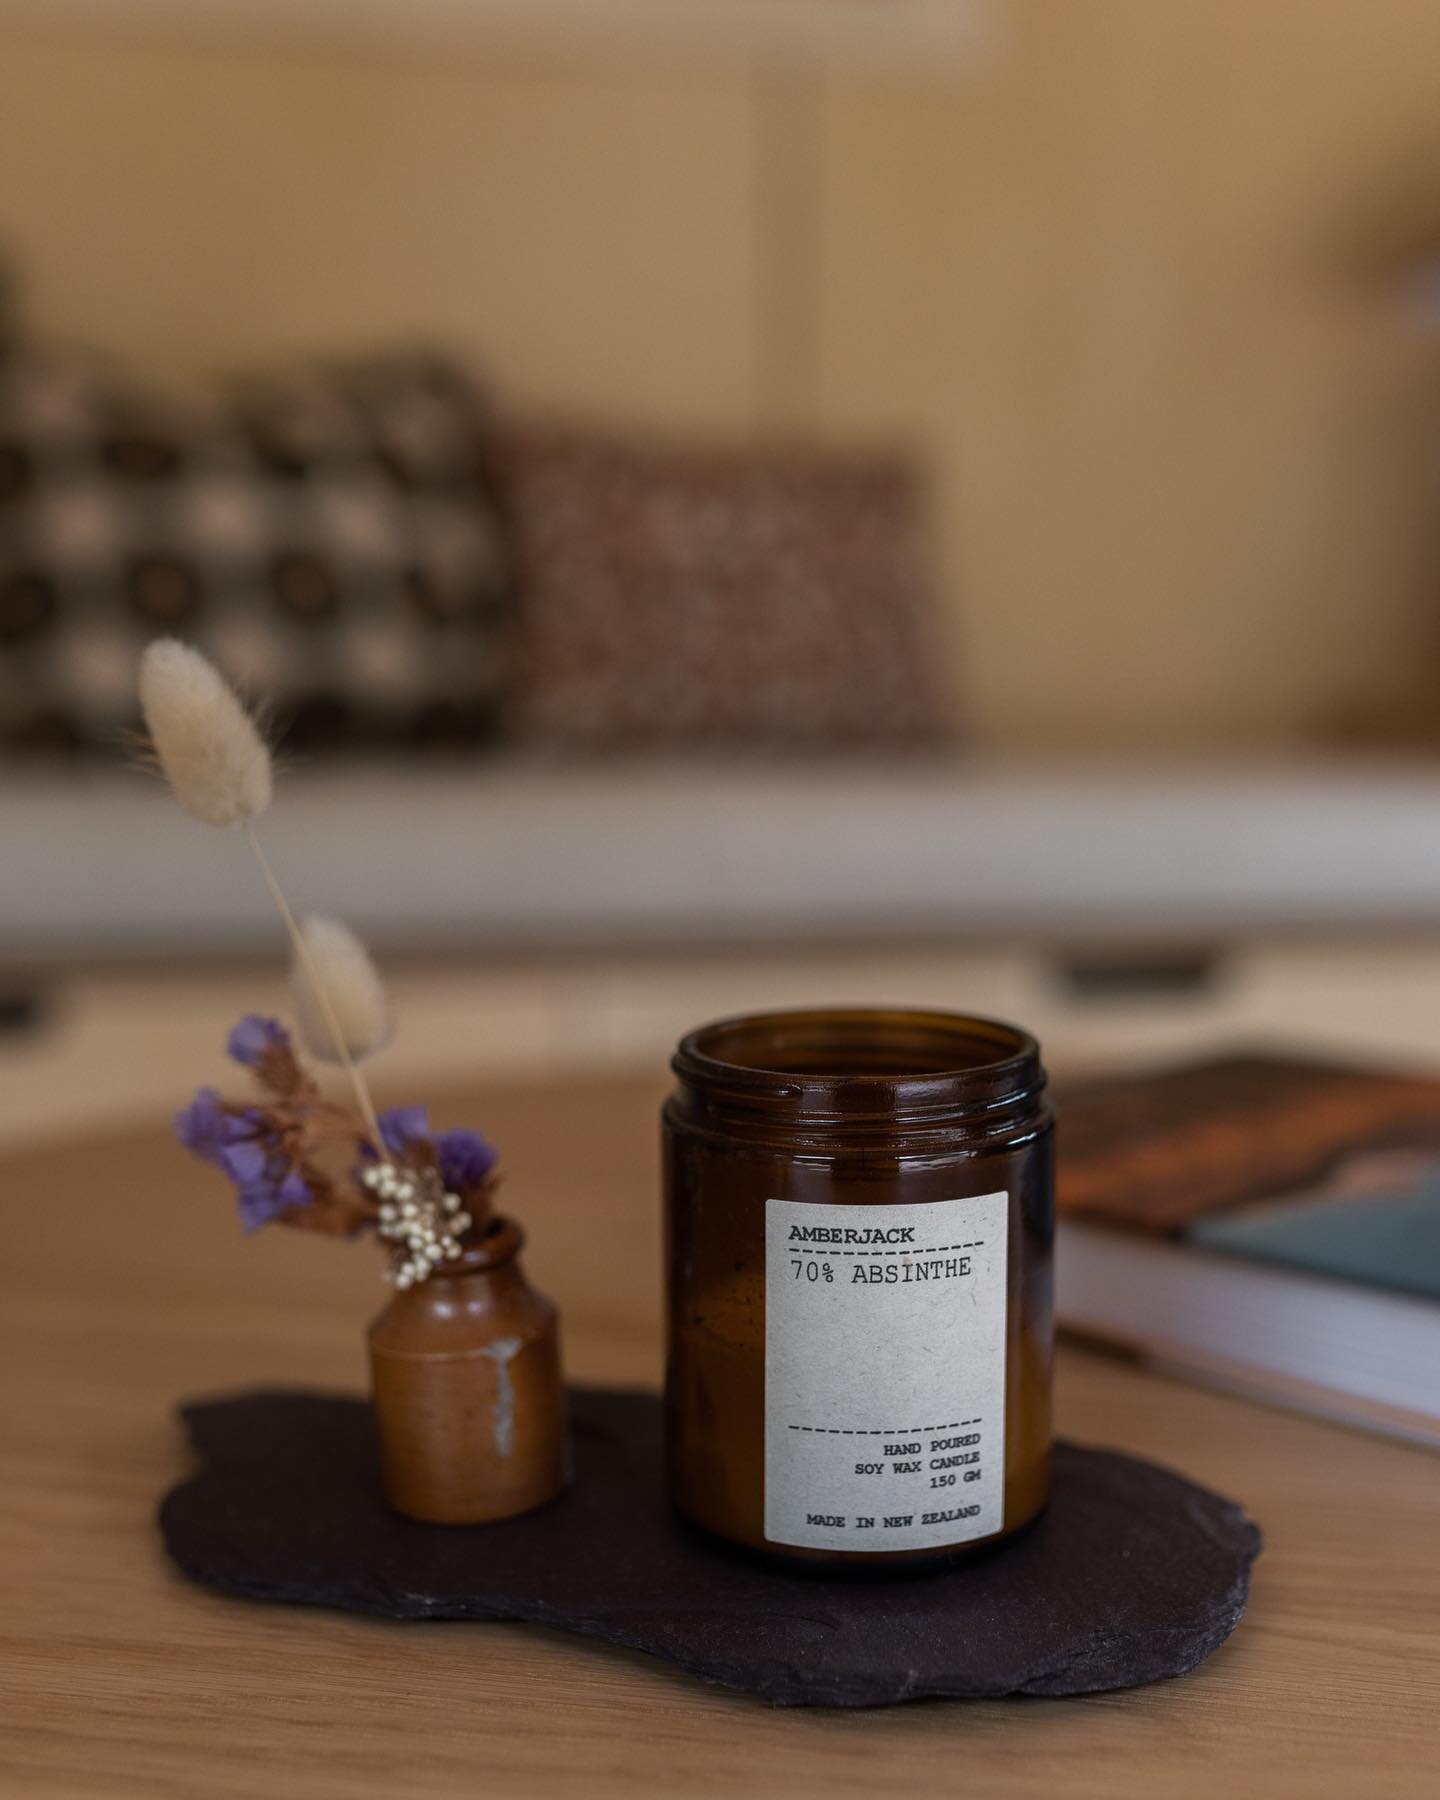 We like to support local whenever we can and we love @amberjackcandlecompany. Made in Paeroa, they create high quality products with an affordable price tag and use simple, no-fuss packaging.